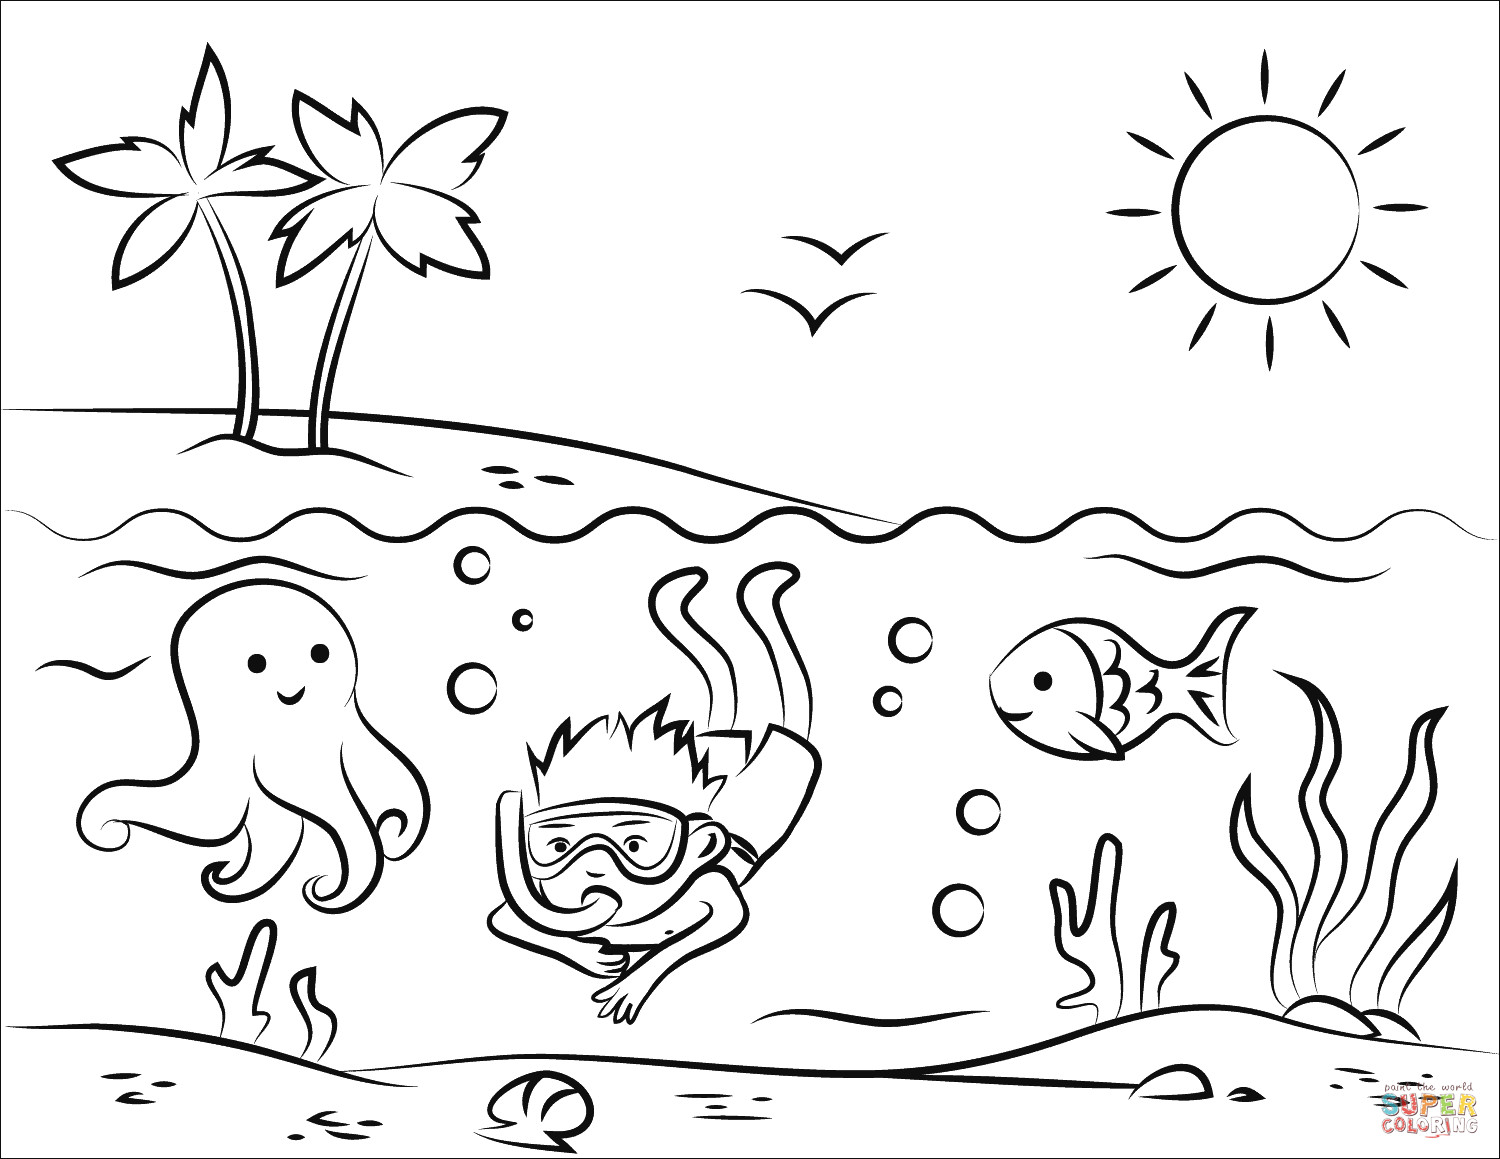 Beach Coloring Pages For Kids
 Tropical Beach coloring page